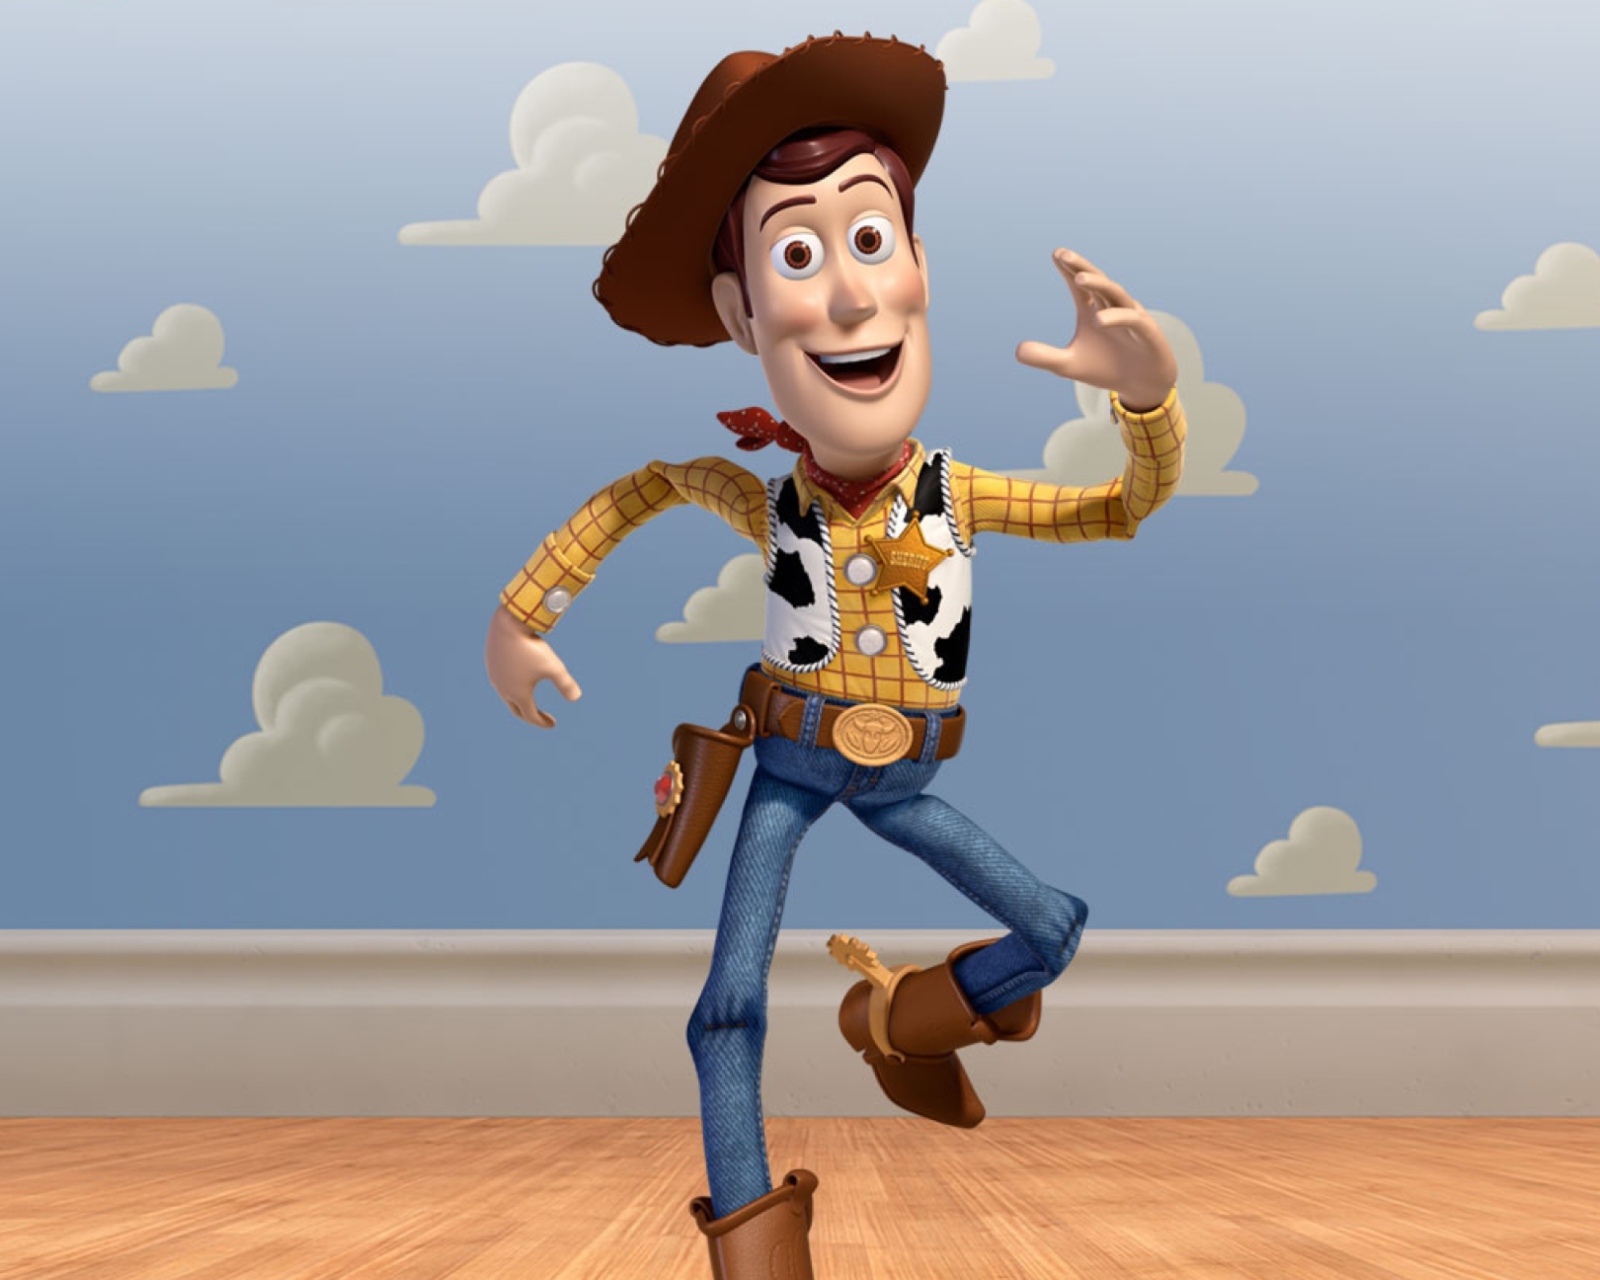 Toy Story 3 wallpaper 1600x1280